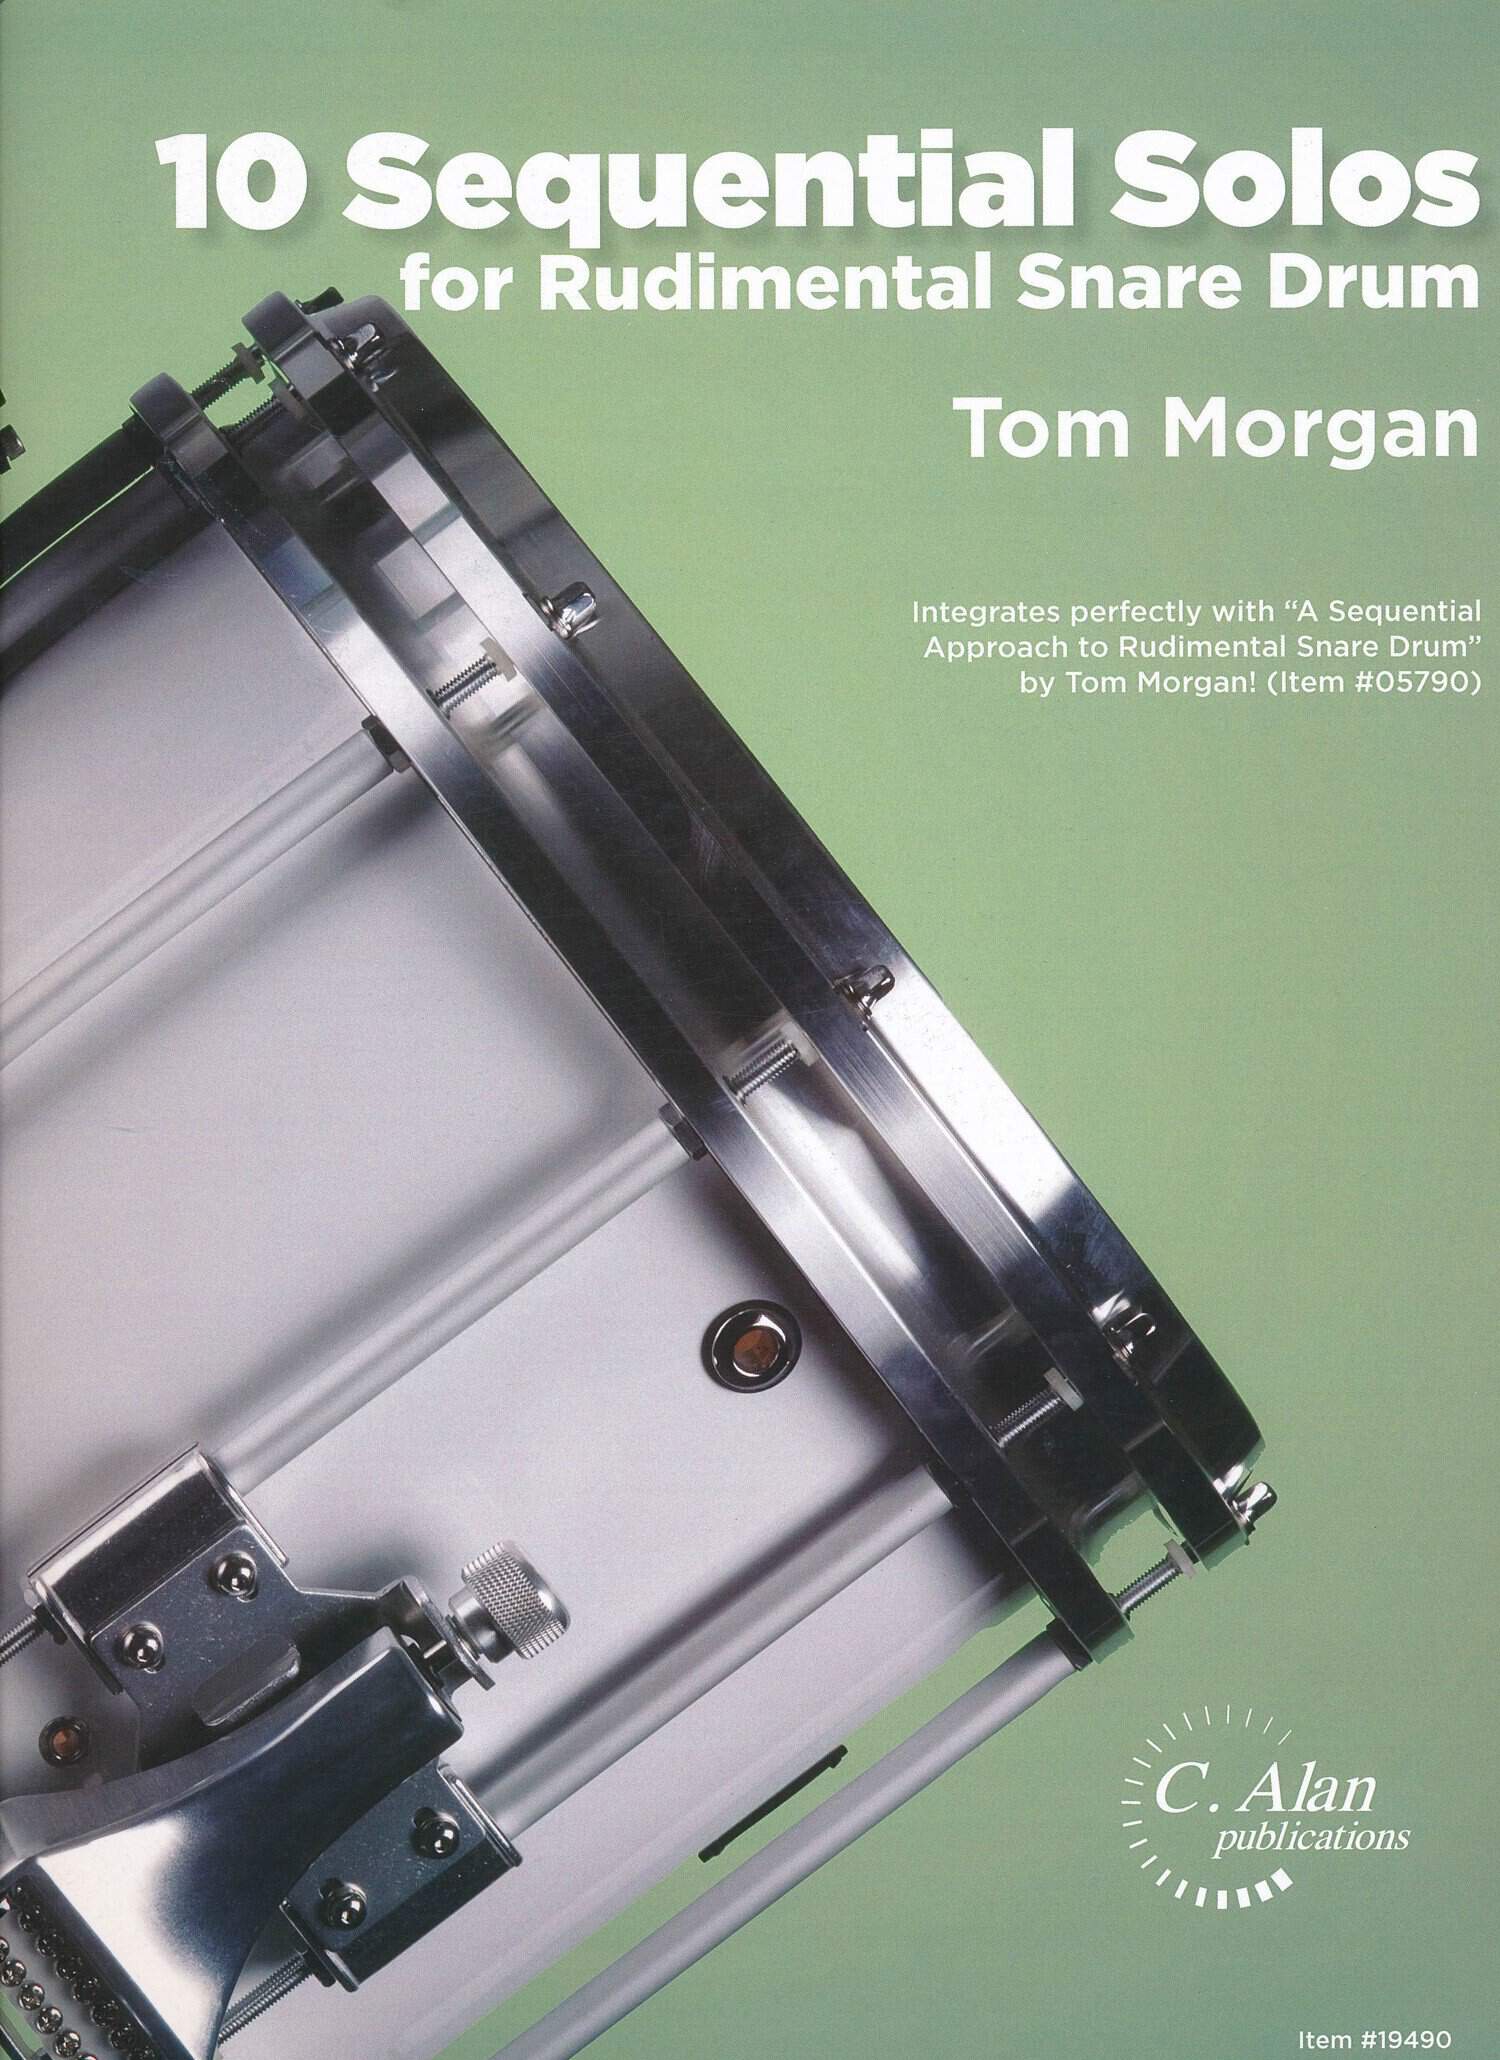 10 Sequential Solos for Rudimental Snare Drum by Tom Morgan